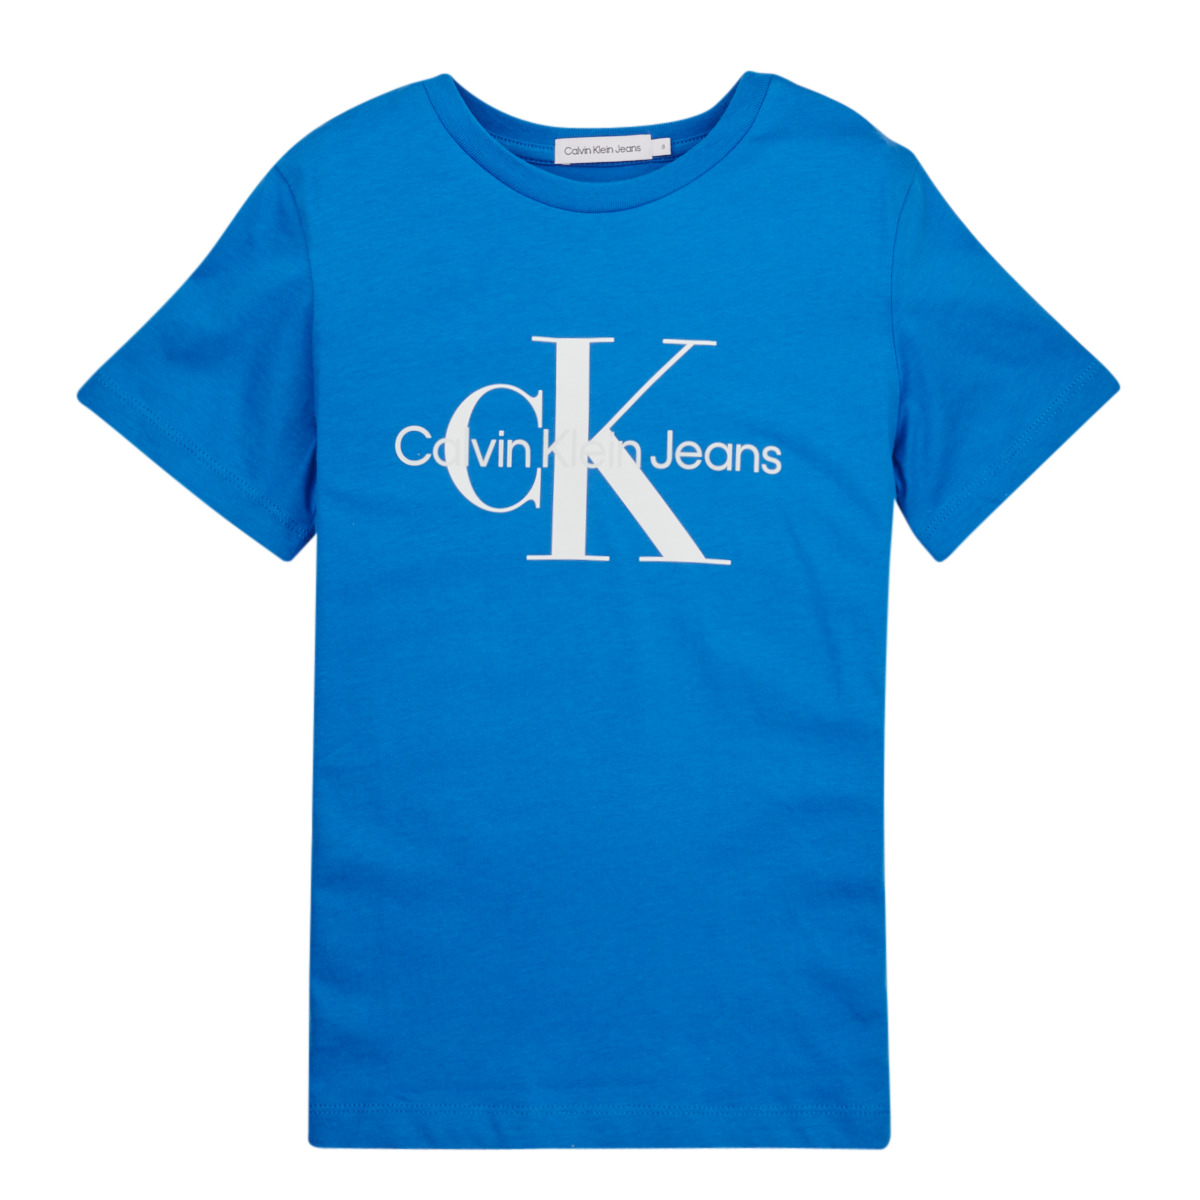 Calvin Klein Jeans MONOGRAM LOGO T-SHIRT Blue - Free delivery | Spartoo NET  ! - Clothing short-sleeved t-shirts Child